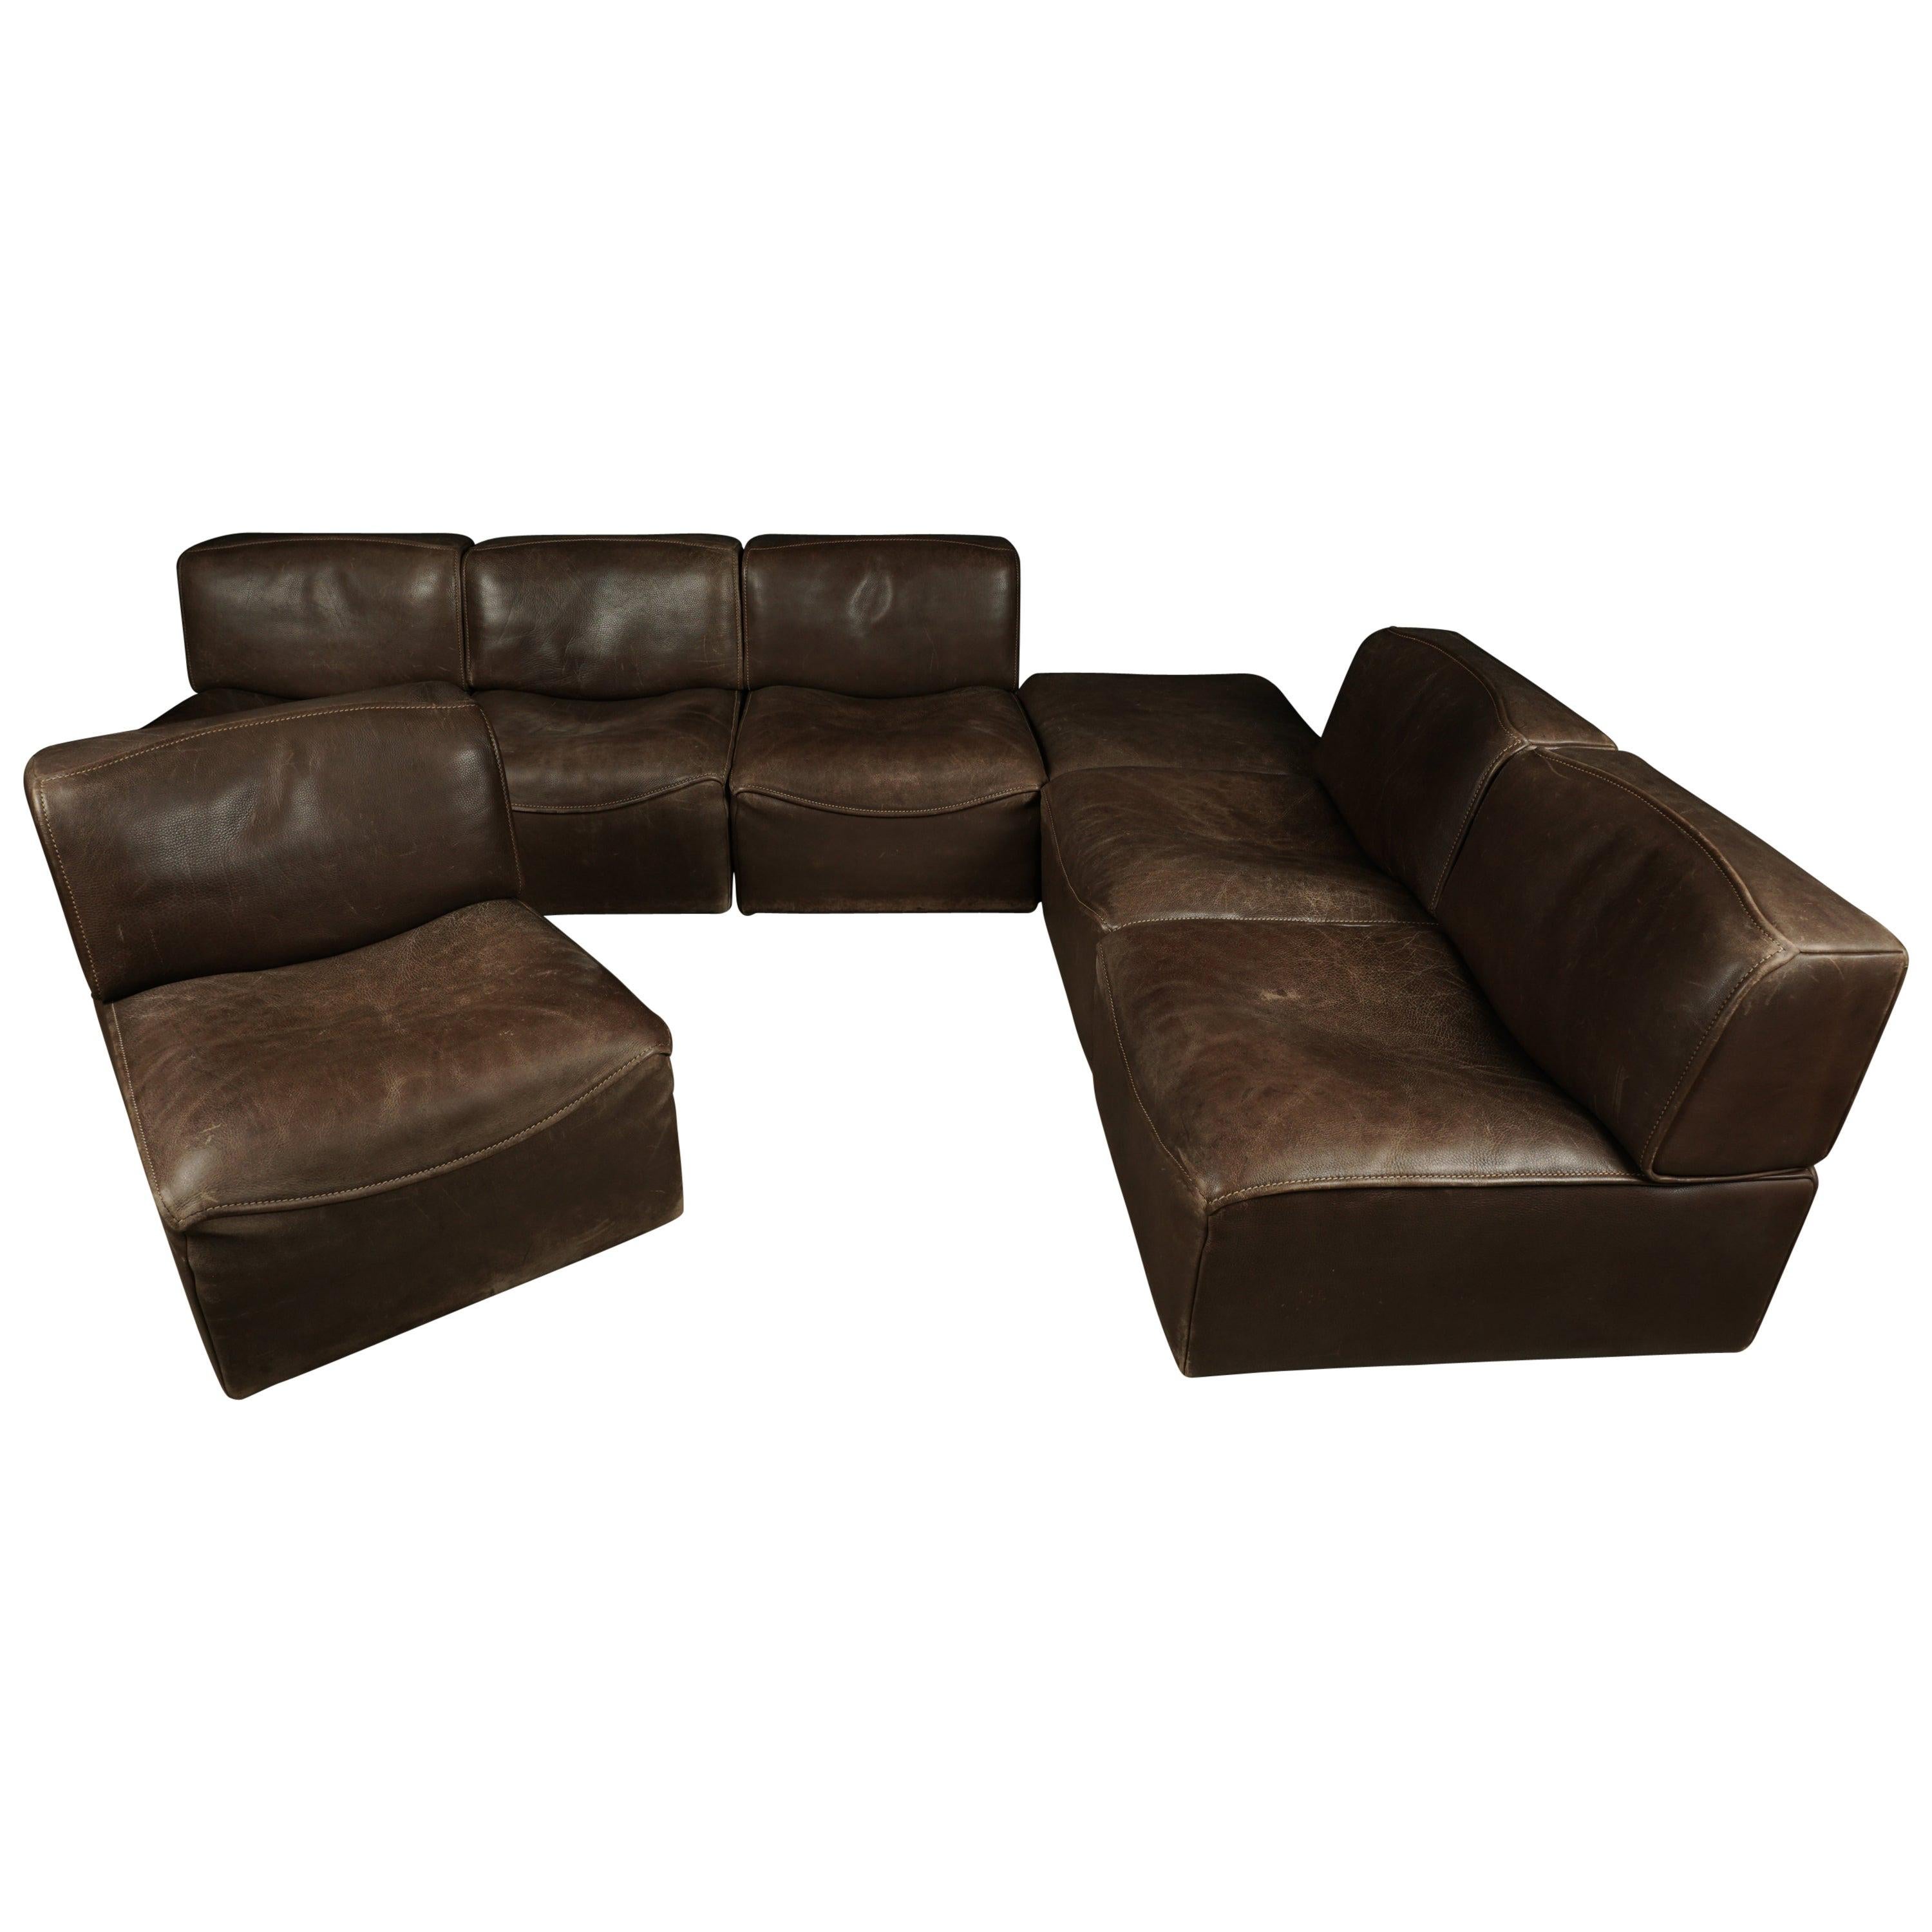 Vintage De Sede 'Ds-15' Modular Sofa in Brown Buffalo Leather from Switzerland